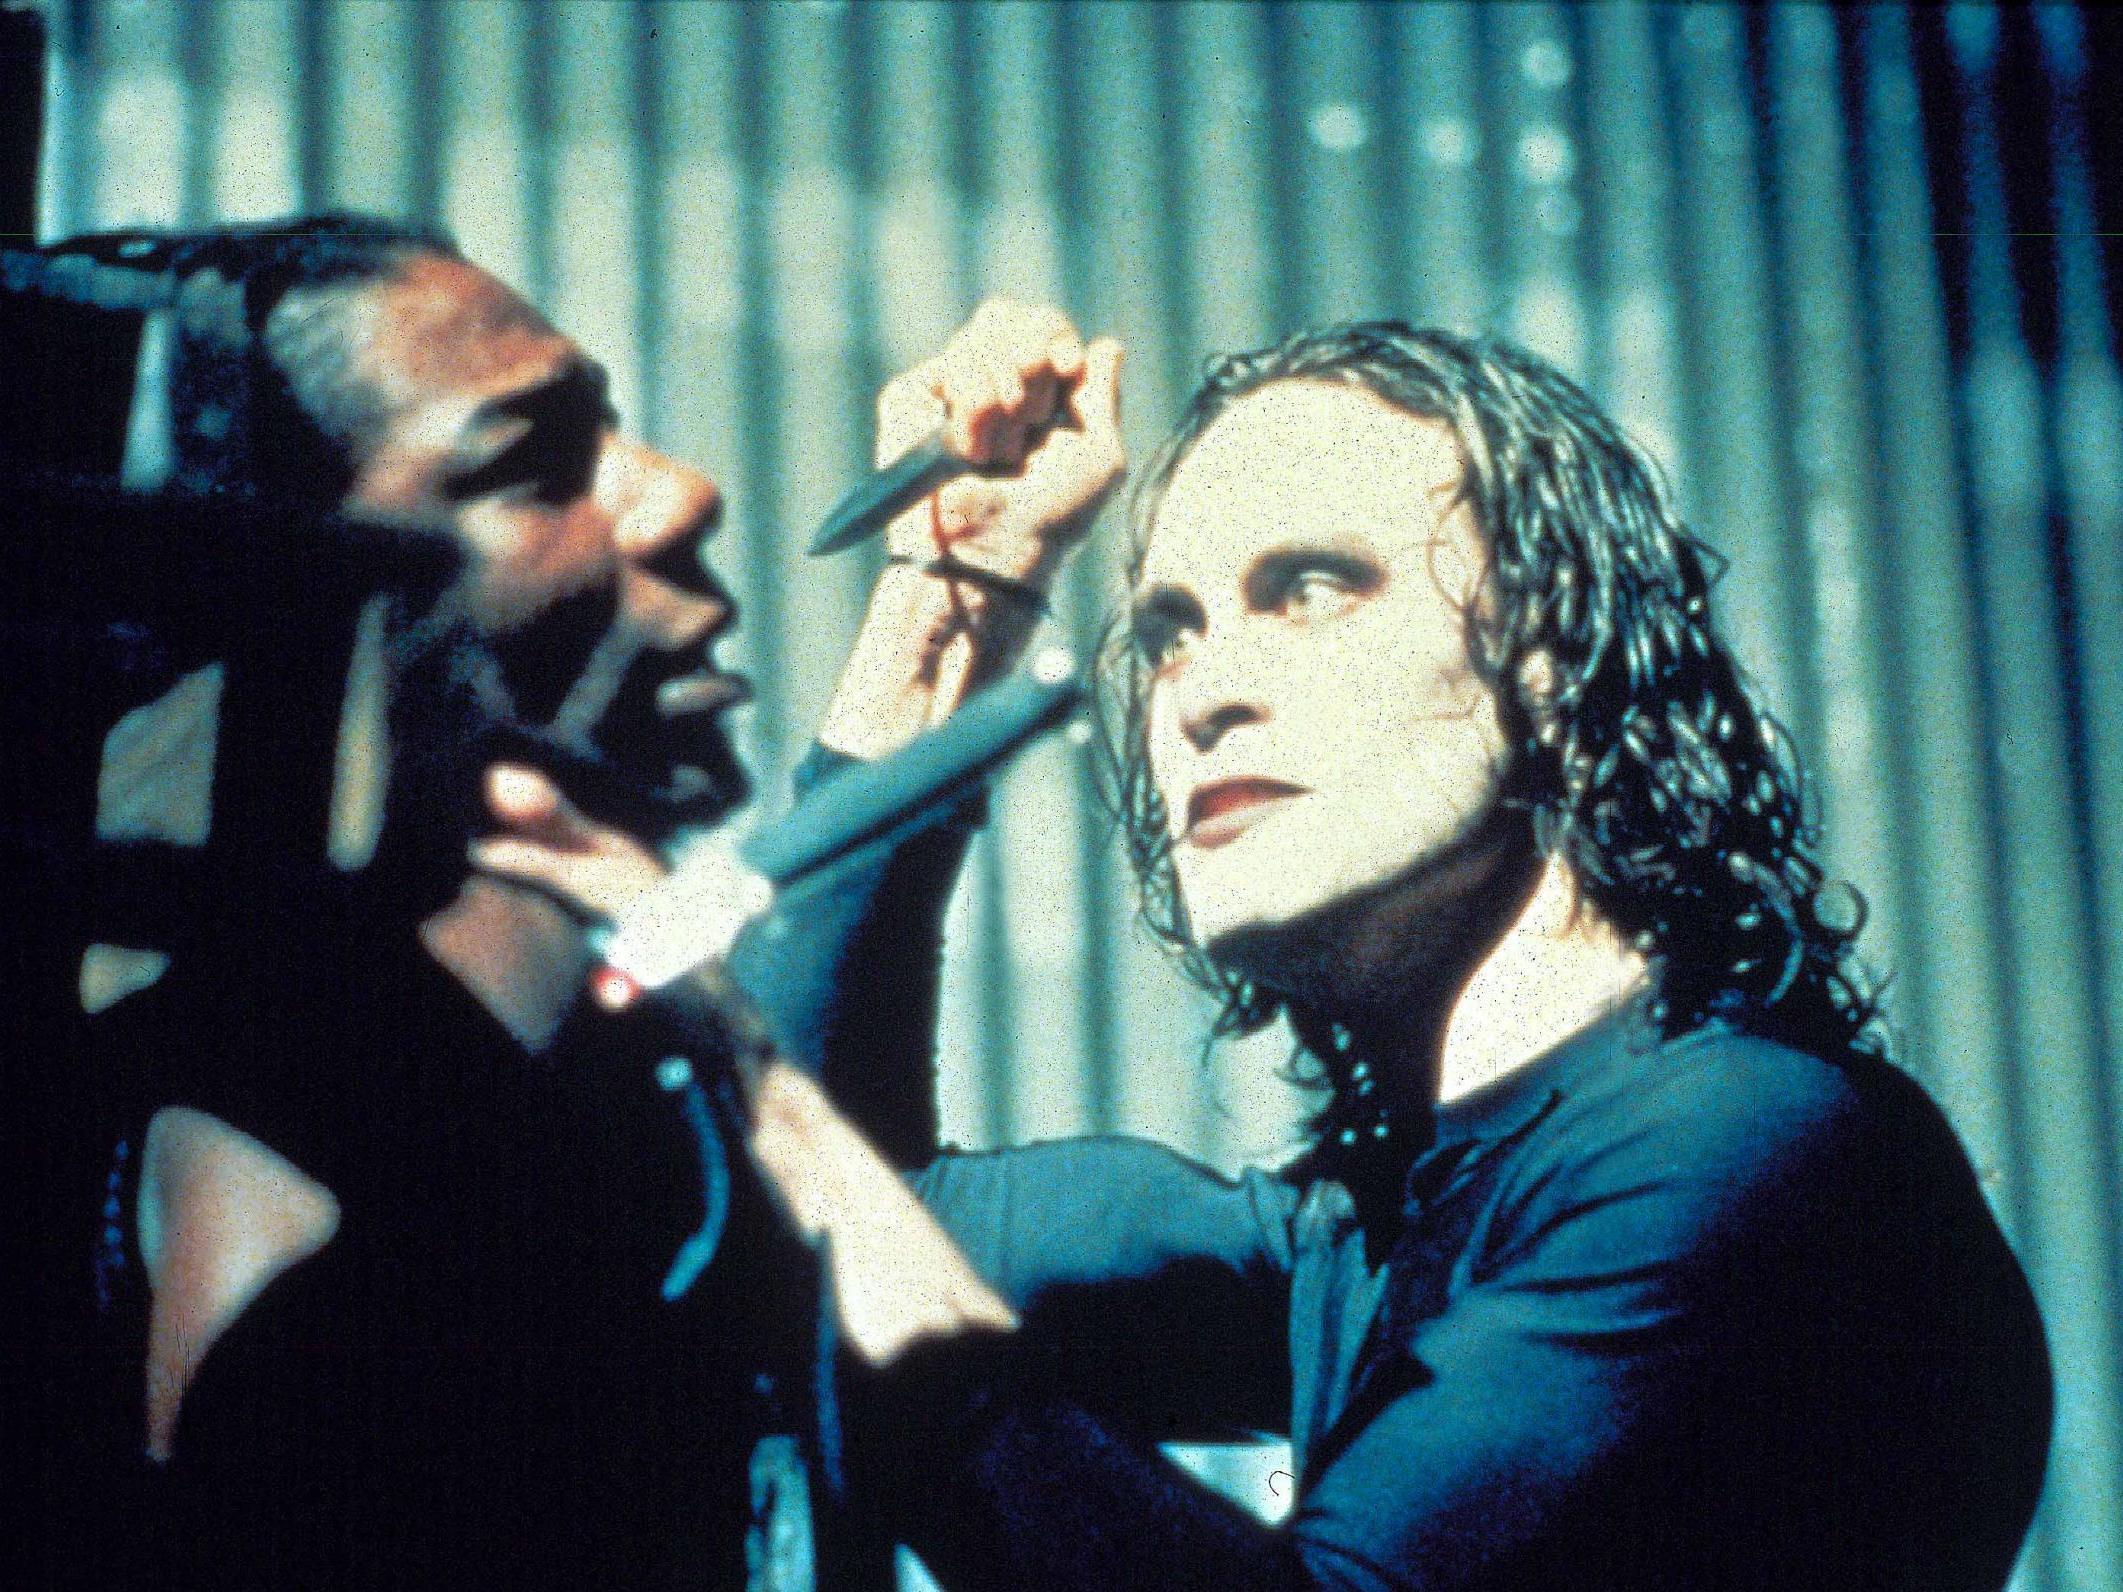 Brandon Lee was fatally wounded on the set of 1994 film ‘The Crow’